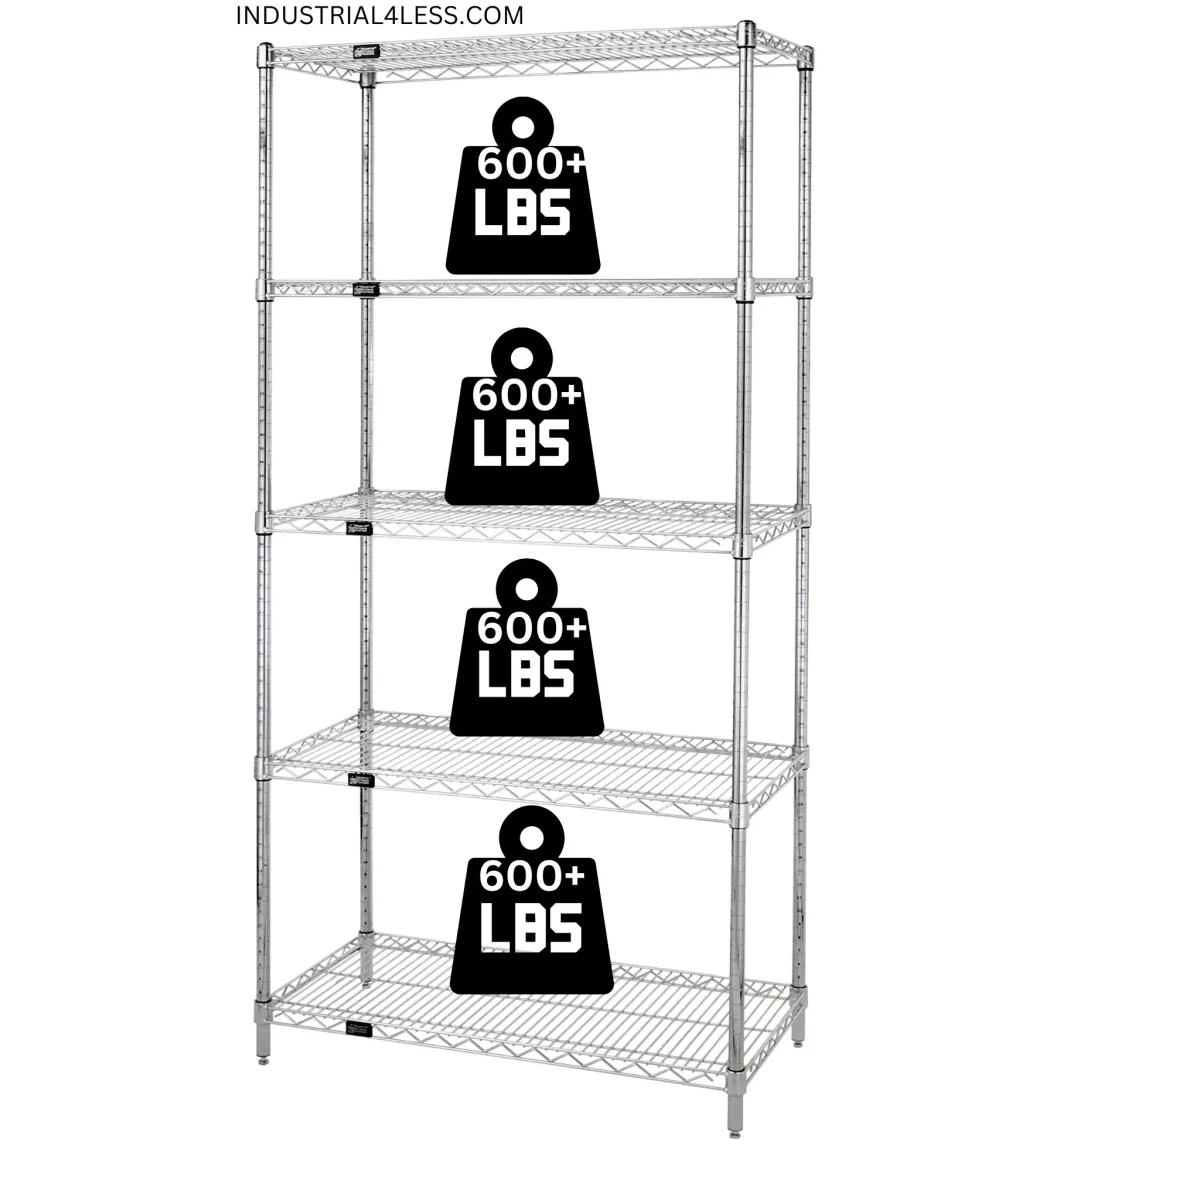 30" x 36" Stainless Steel Wire Shelving Unit - Industrial 4 Less - 30365S-5